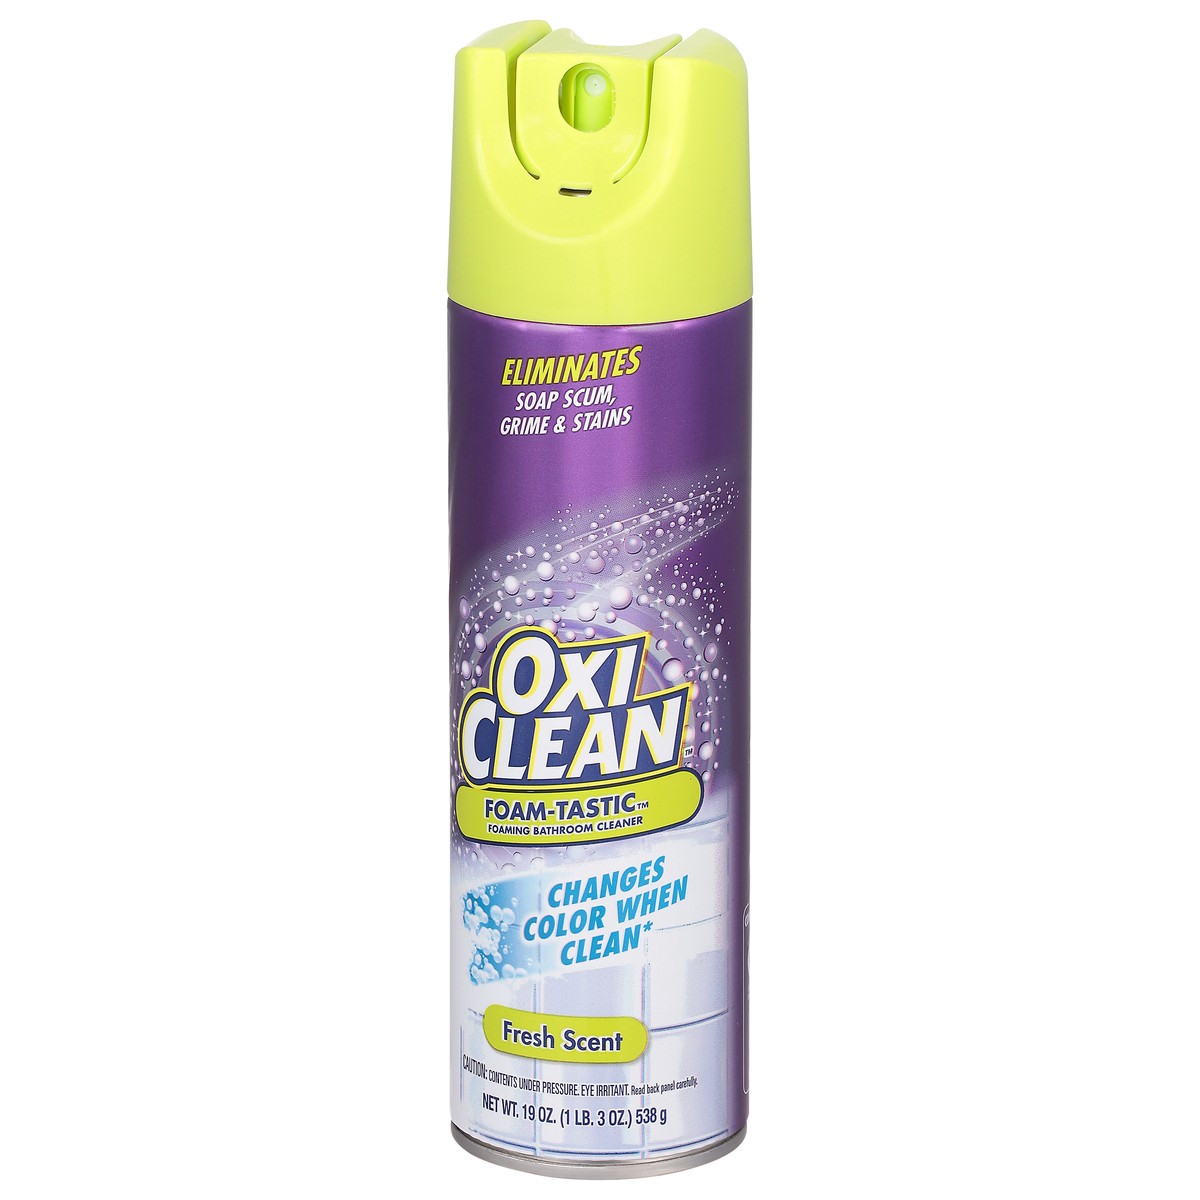 slide 2 of 9, Oxi-Clean Foam-Tastic™ Foaming Bathroom Cleaner, Fresh Scent, 19 oz Spray Can, Eliminates Soap Scum, Grime and Stains, 19 oz